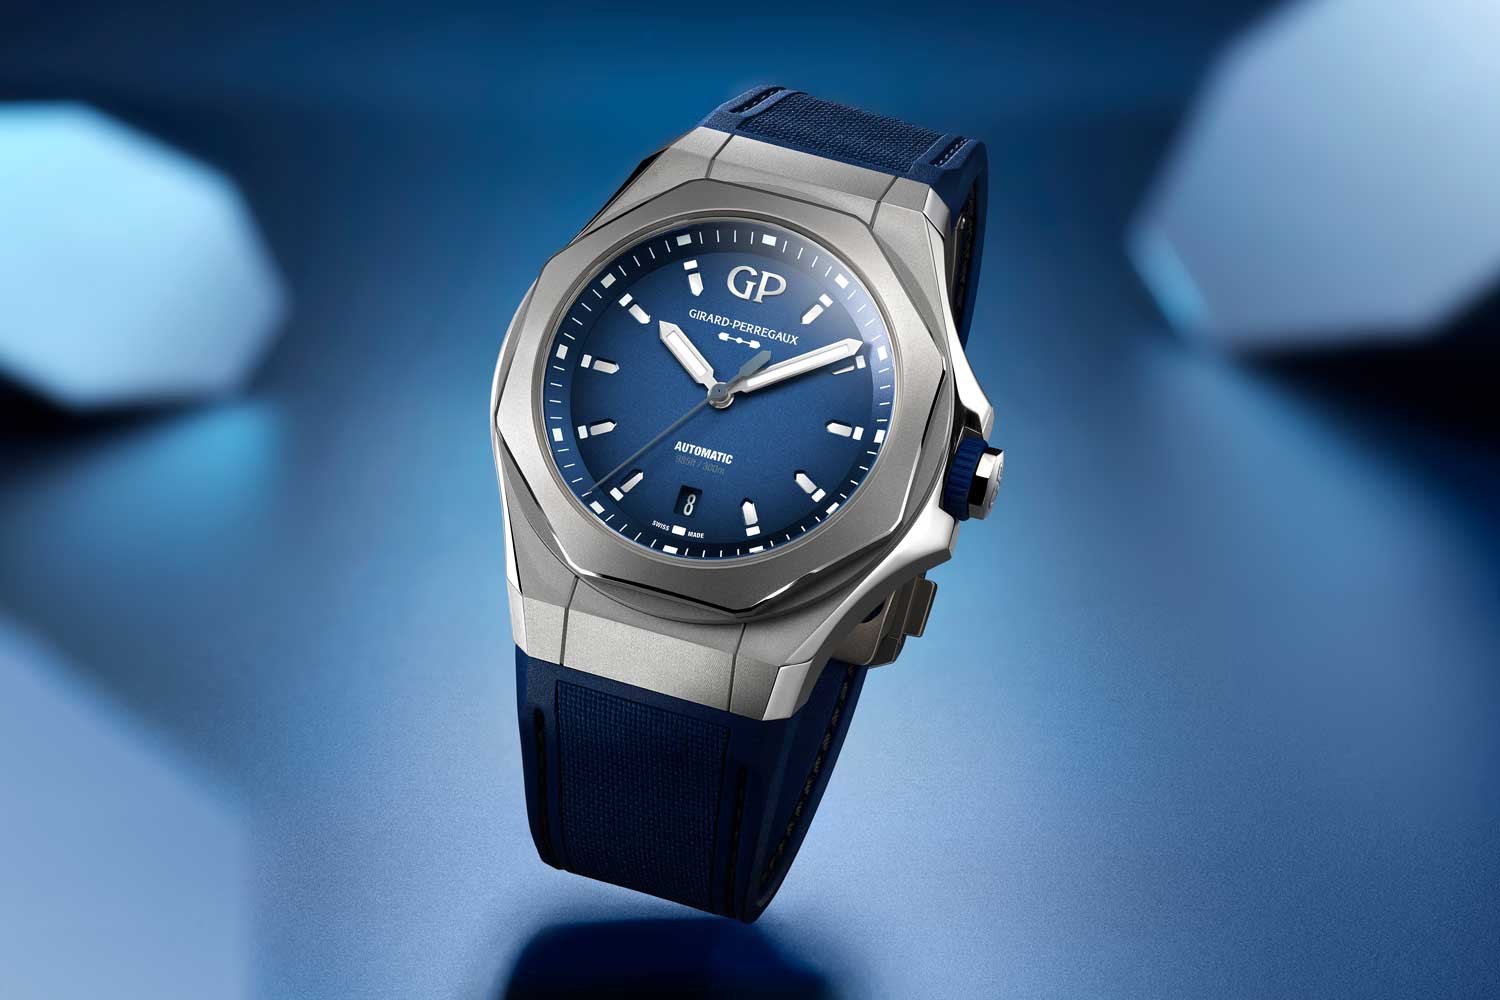 The Girard-Perregaux Laureato Absolute Ti 230 with the blue sandwich dial